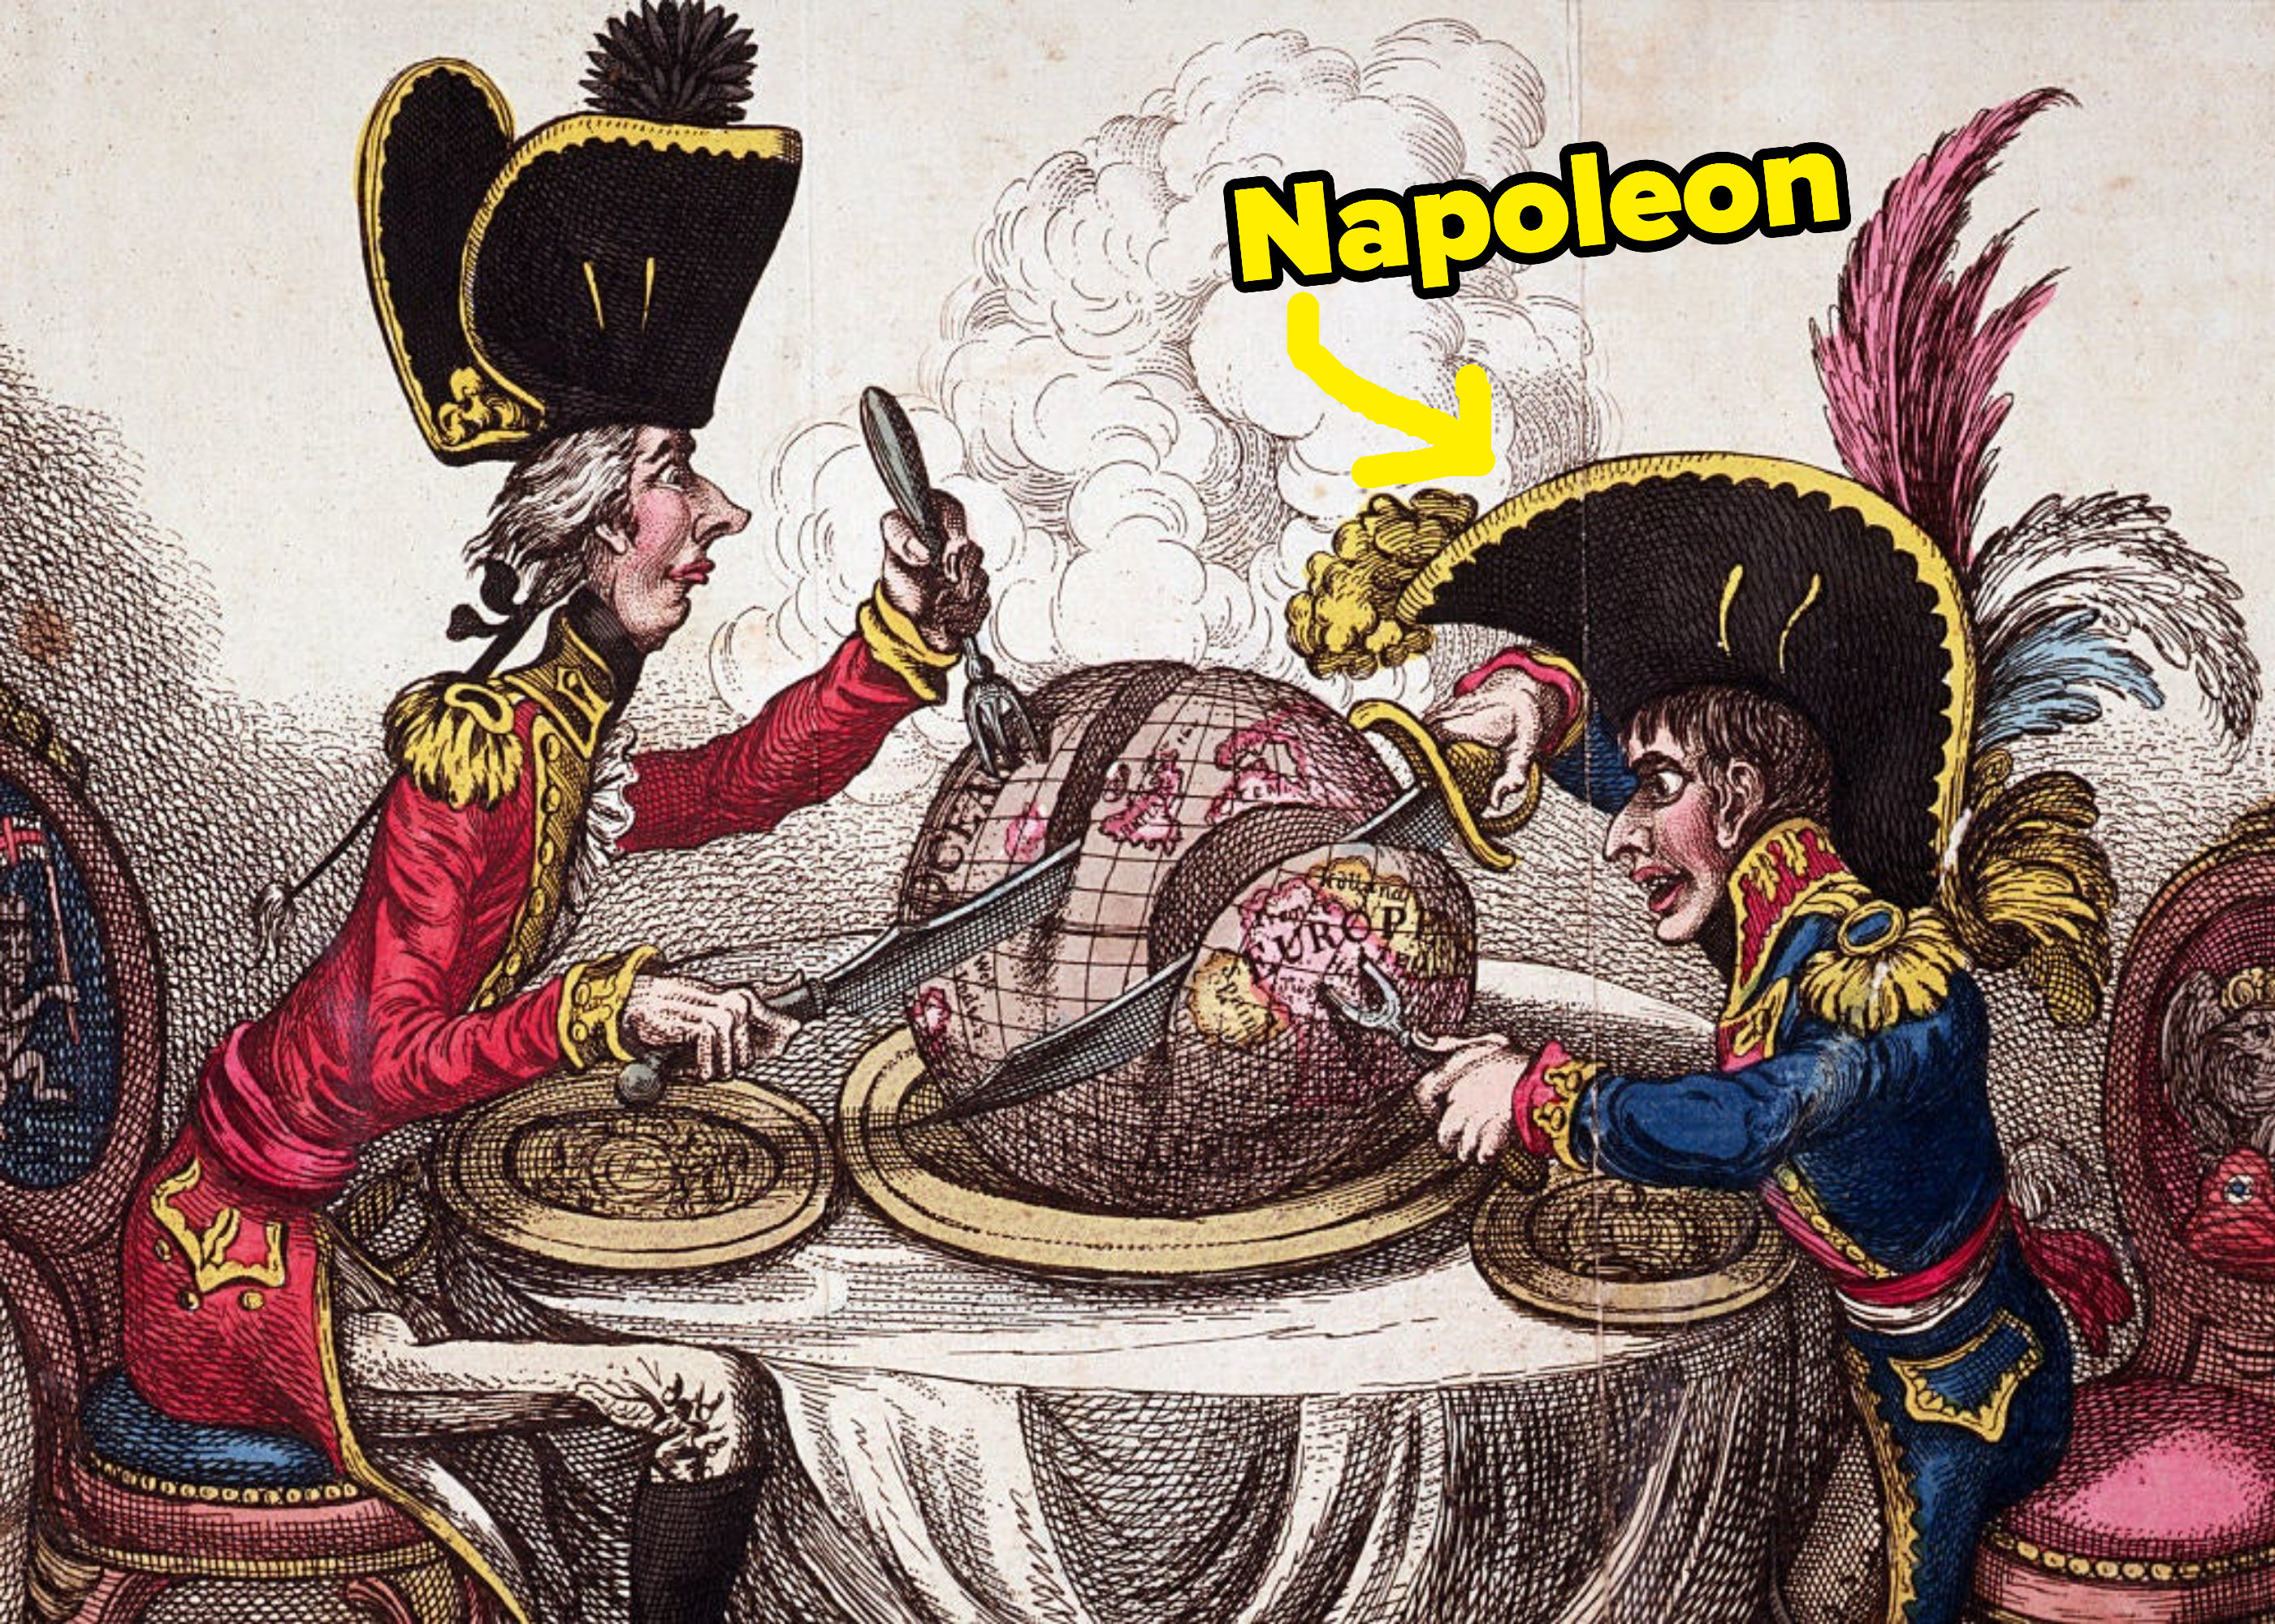 An illustration of Napoleon carving up a globe of the world